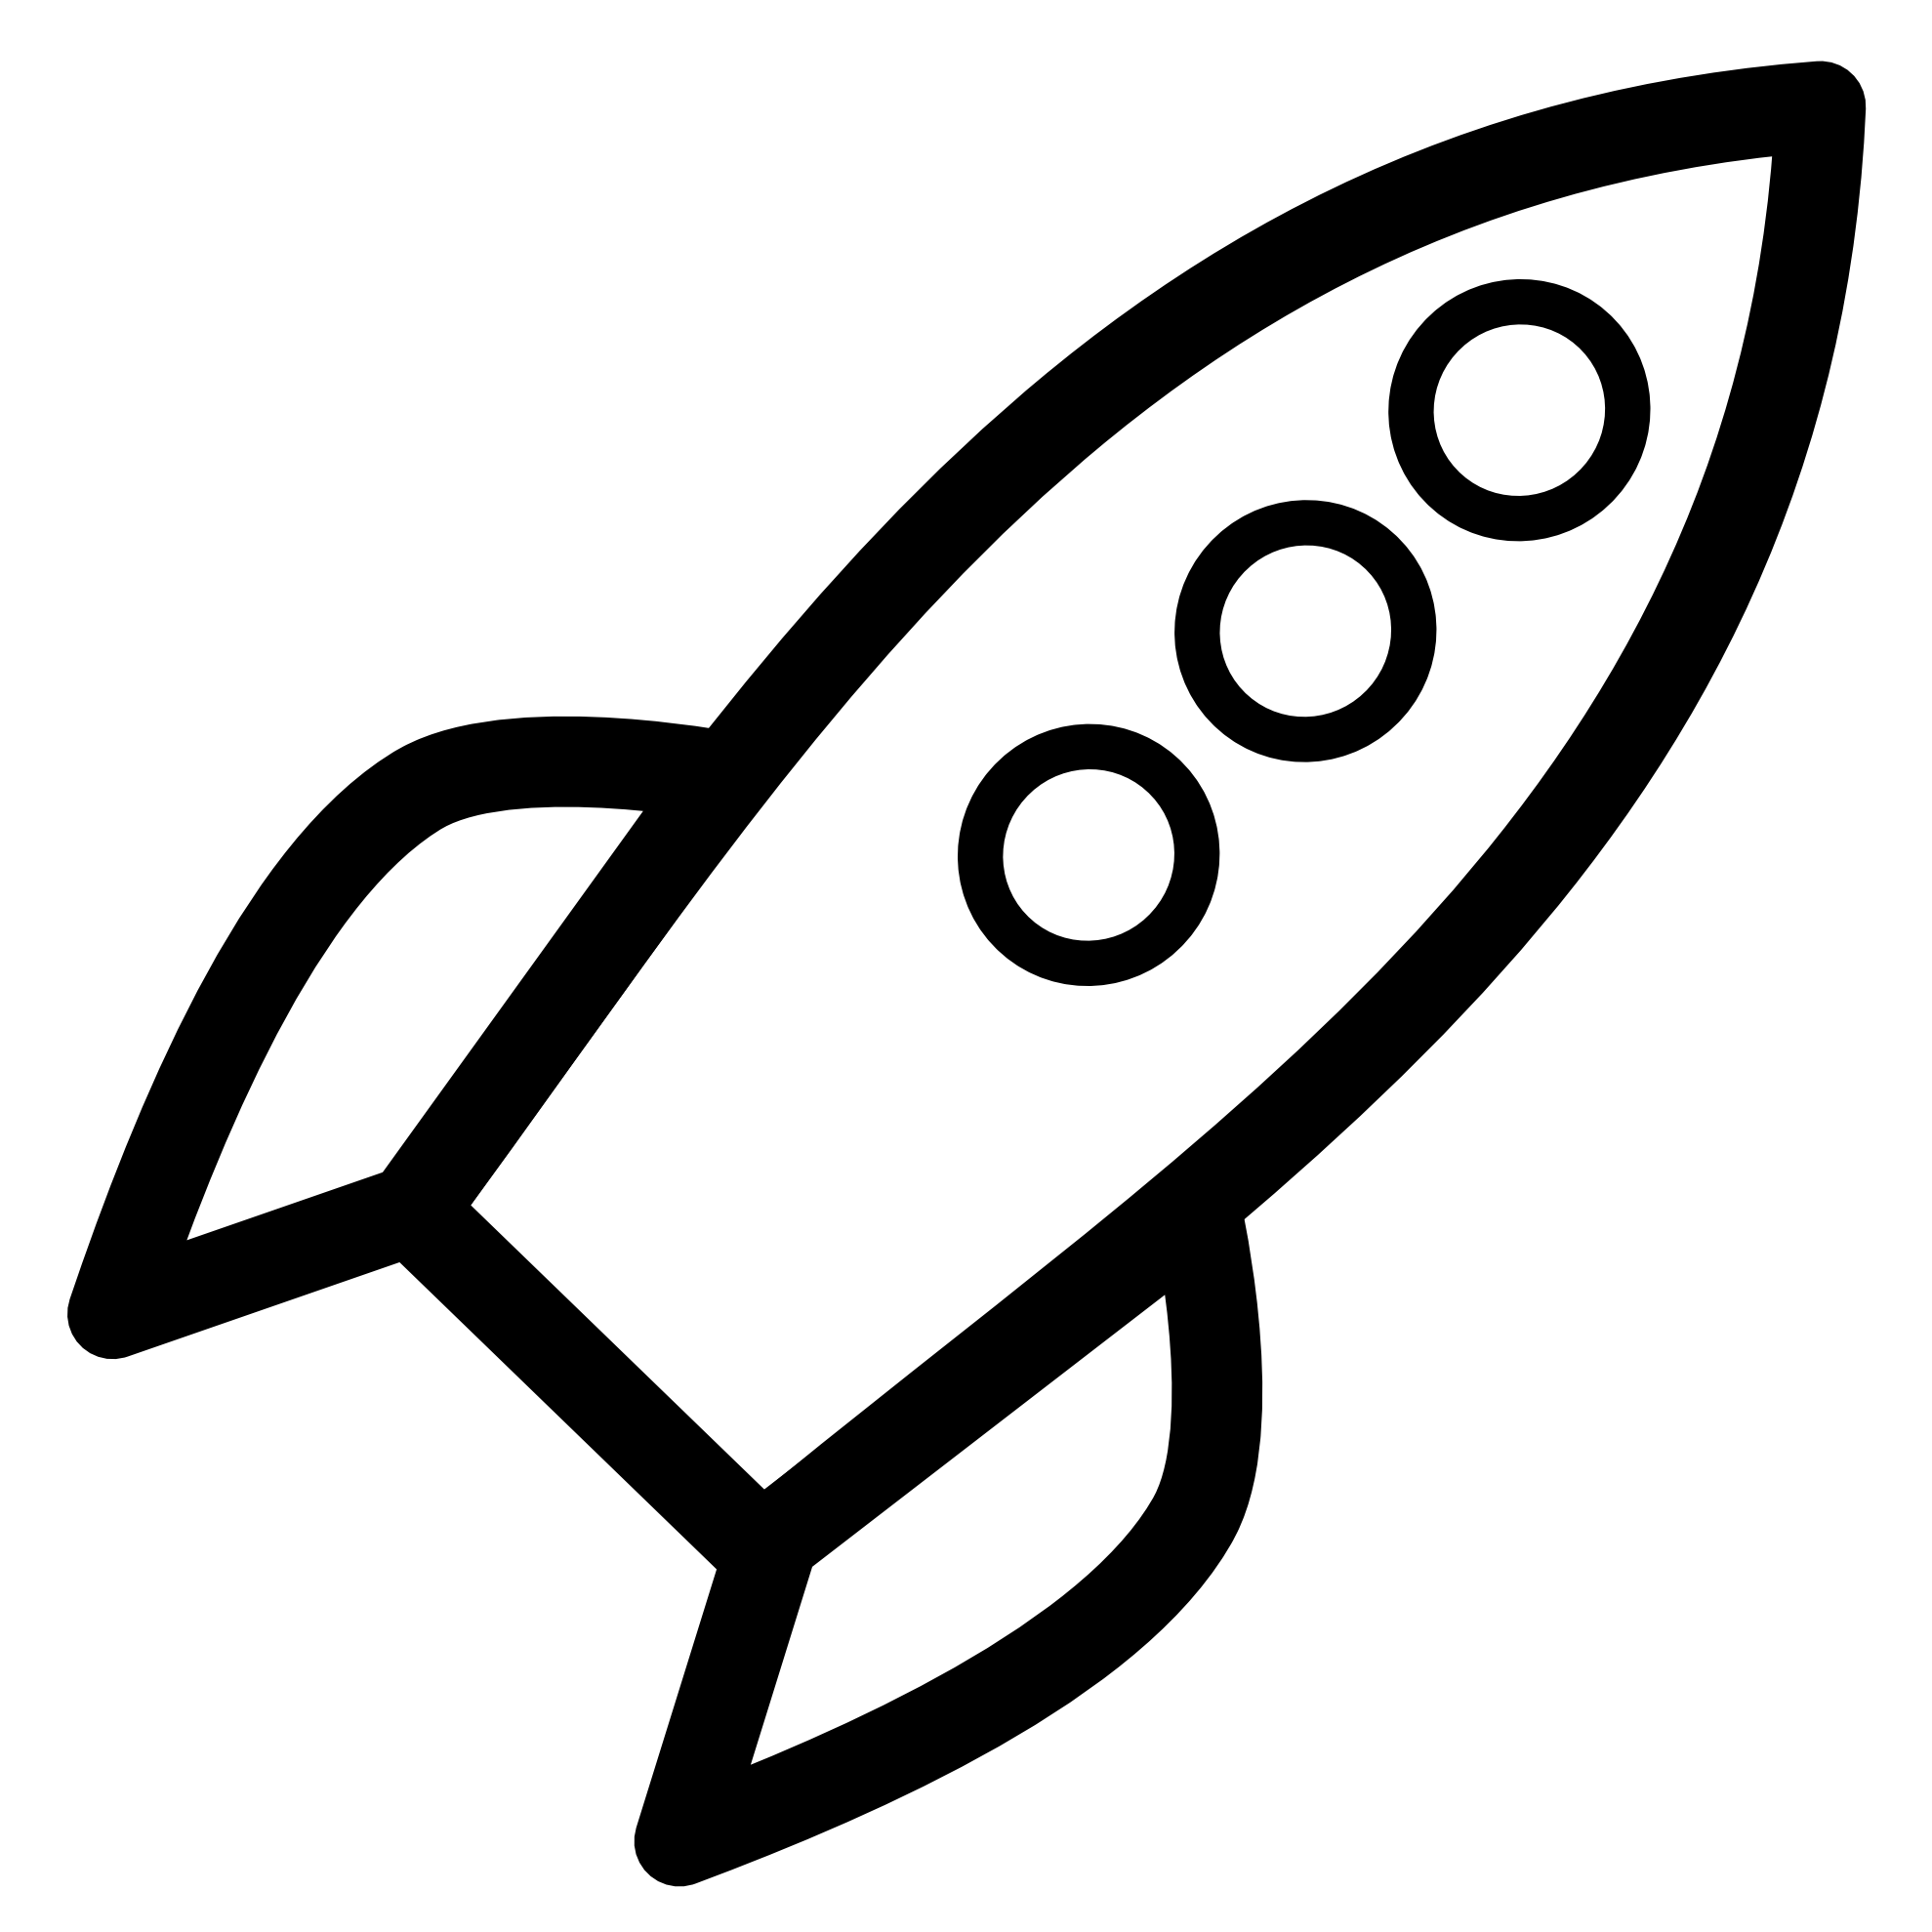 Rocket clipart black and white free images